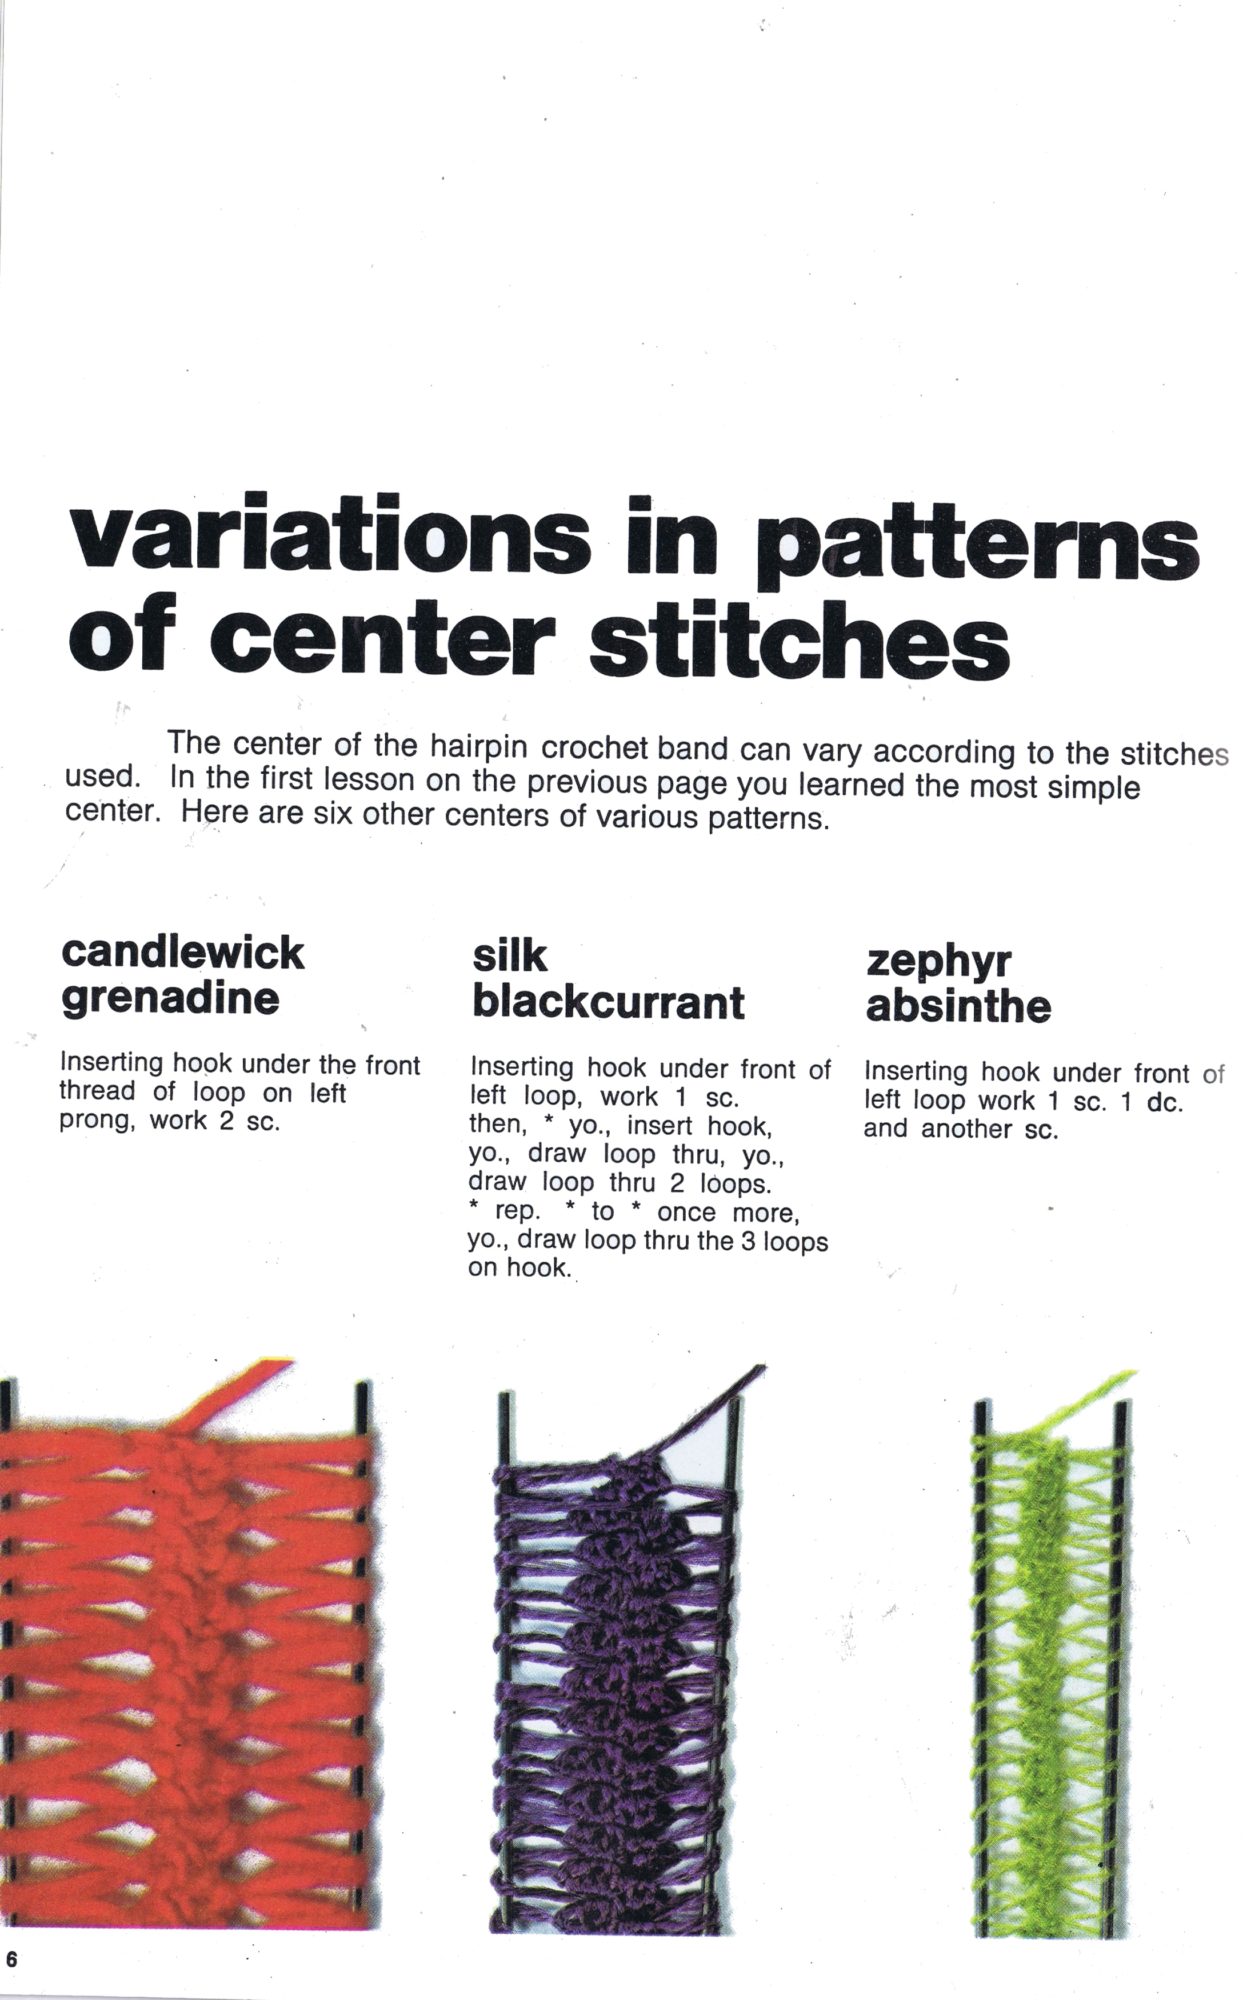 Variations in patterns of center stitches